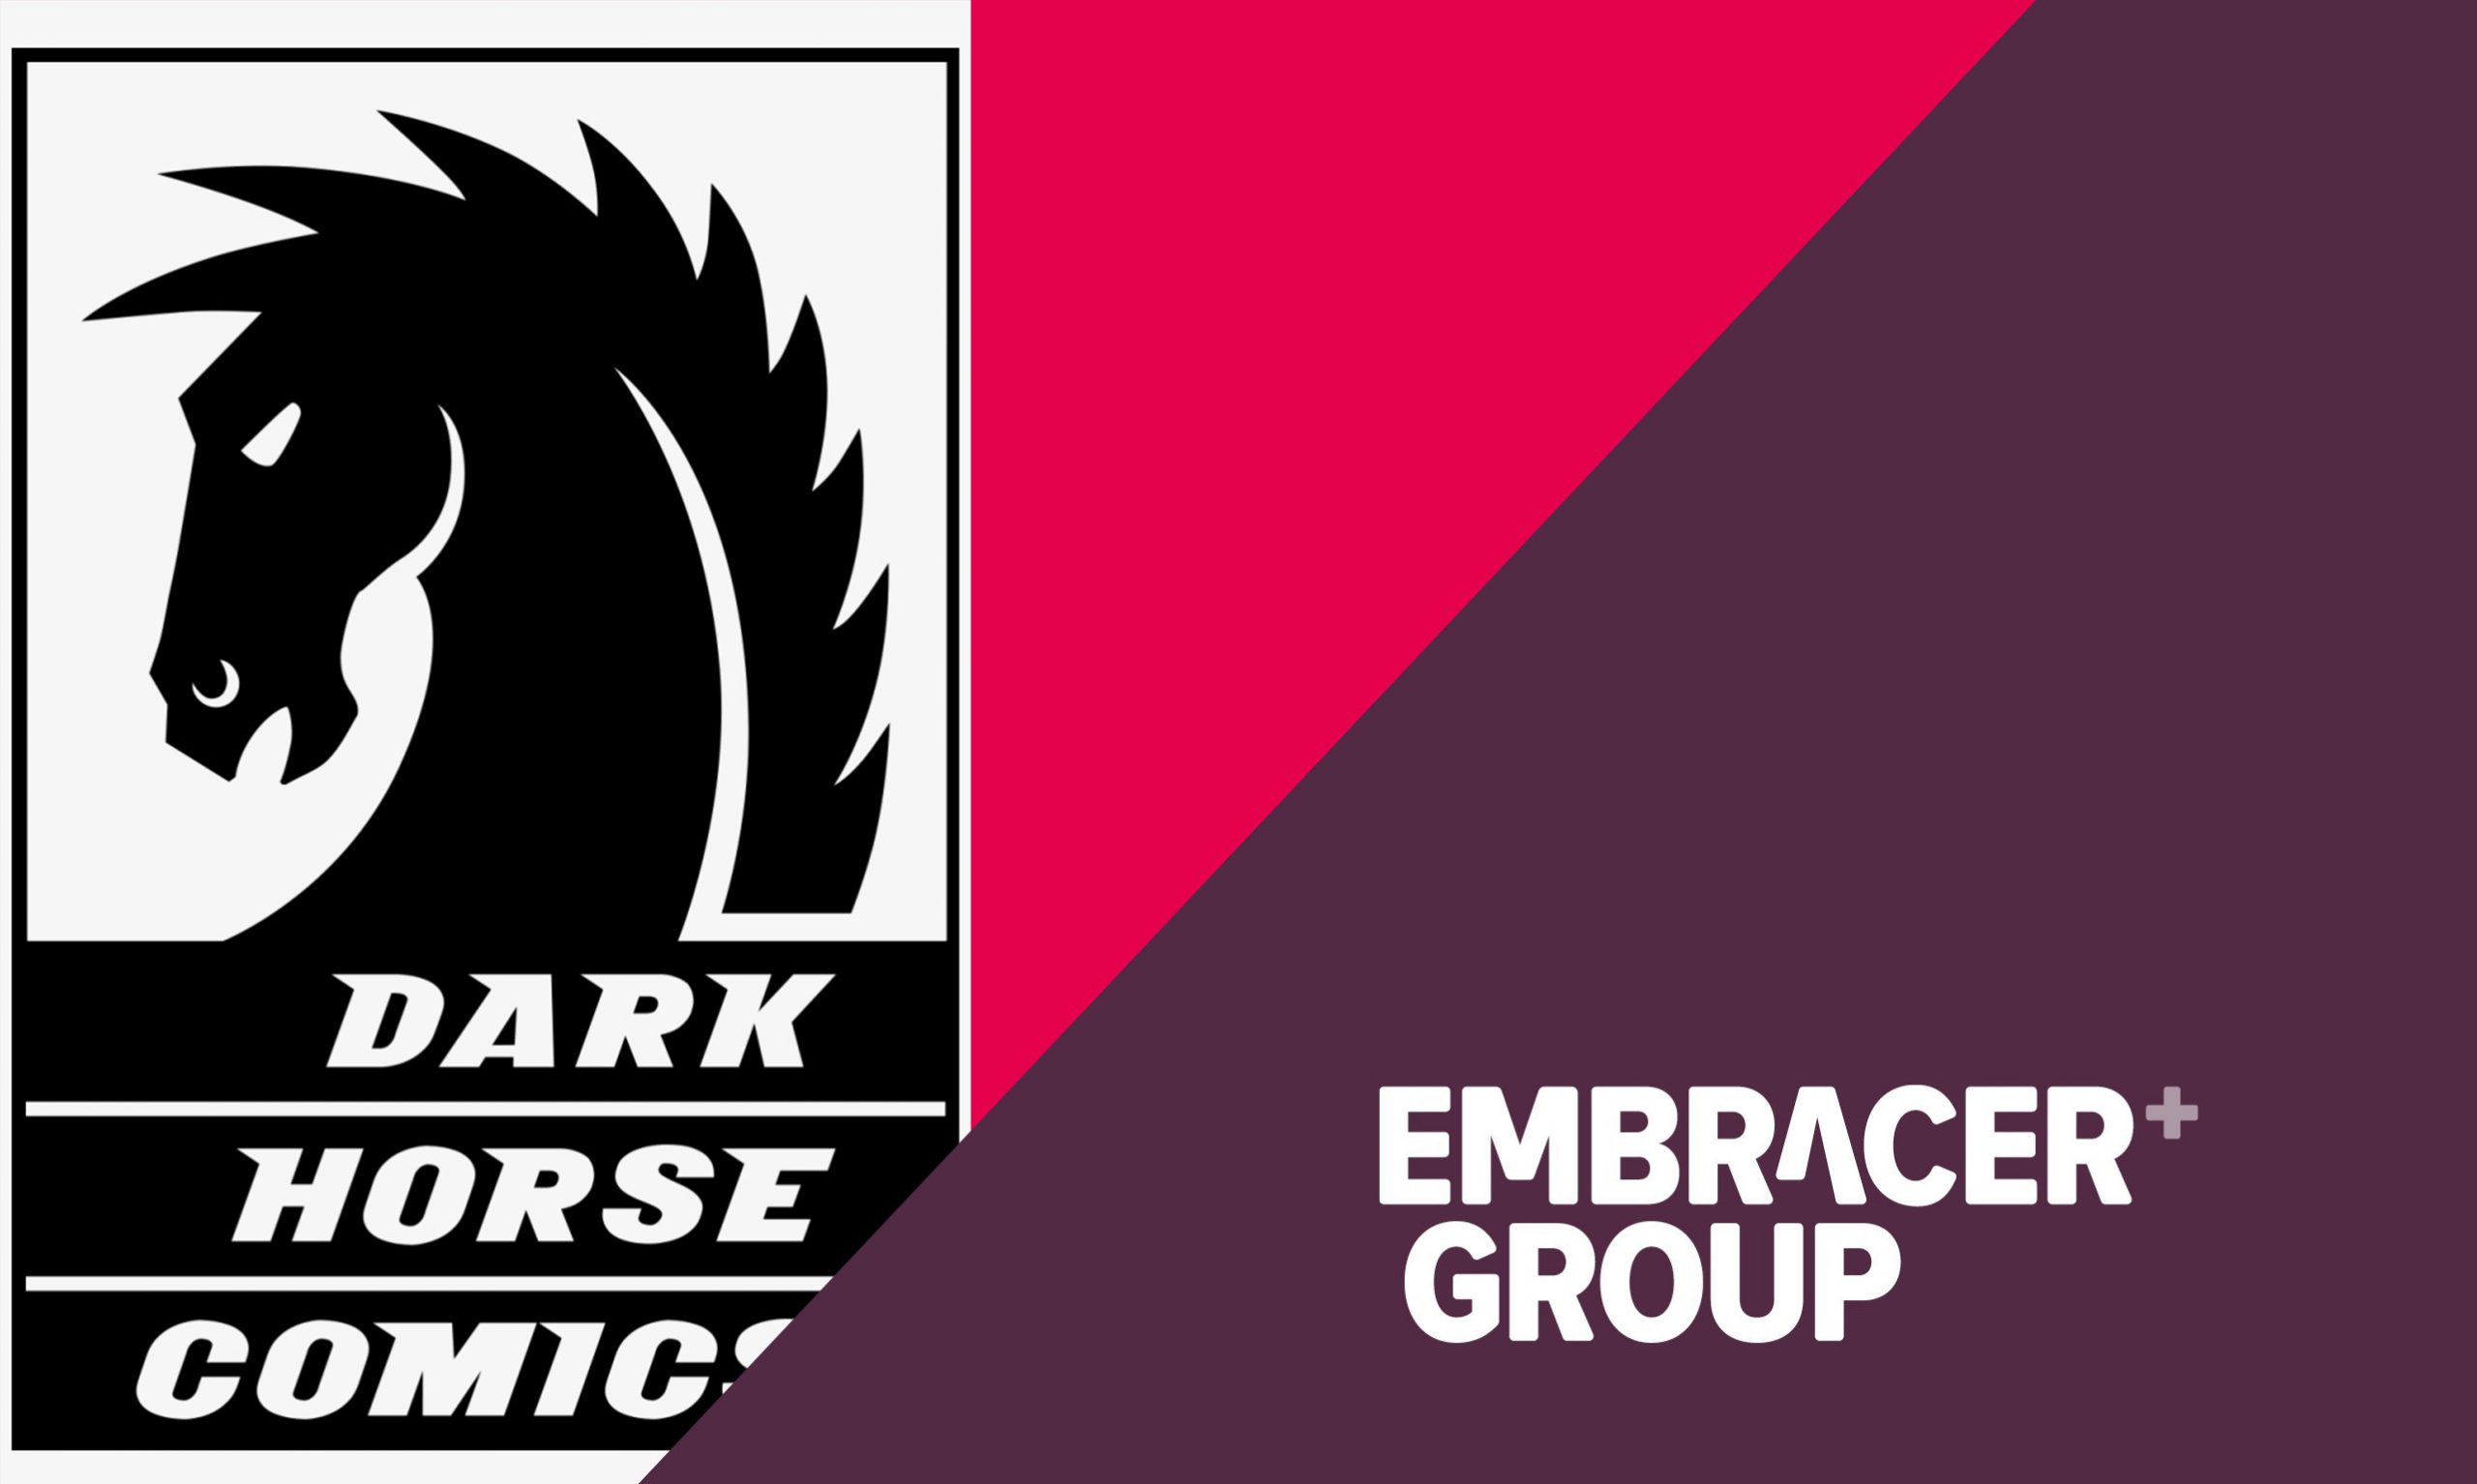 Dark Horse acquired by video game company Embracer Group AB